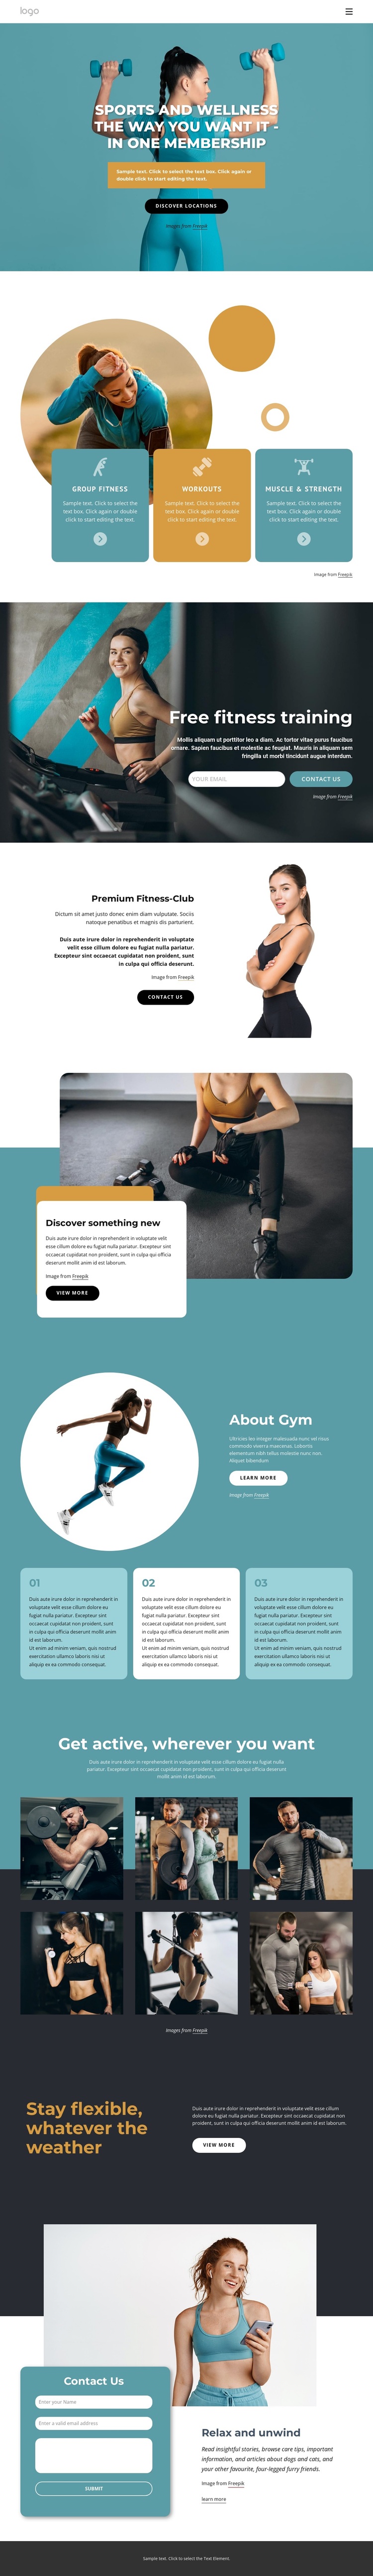 Workout anywhere with one membership Joomla Page Builder